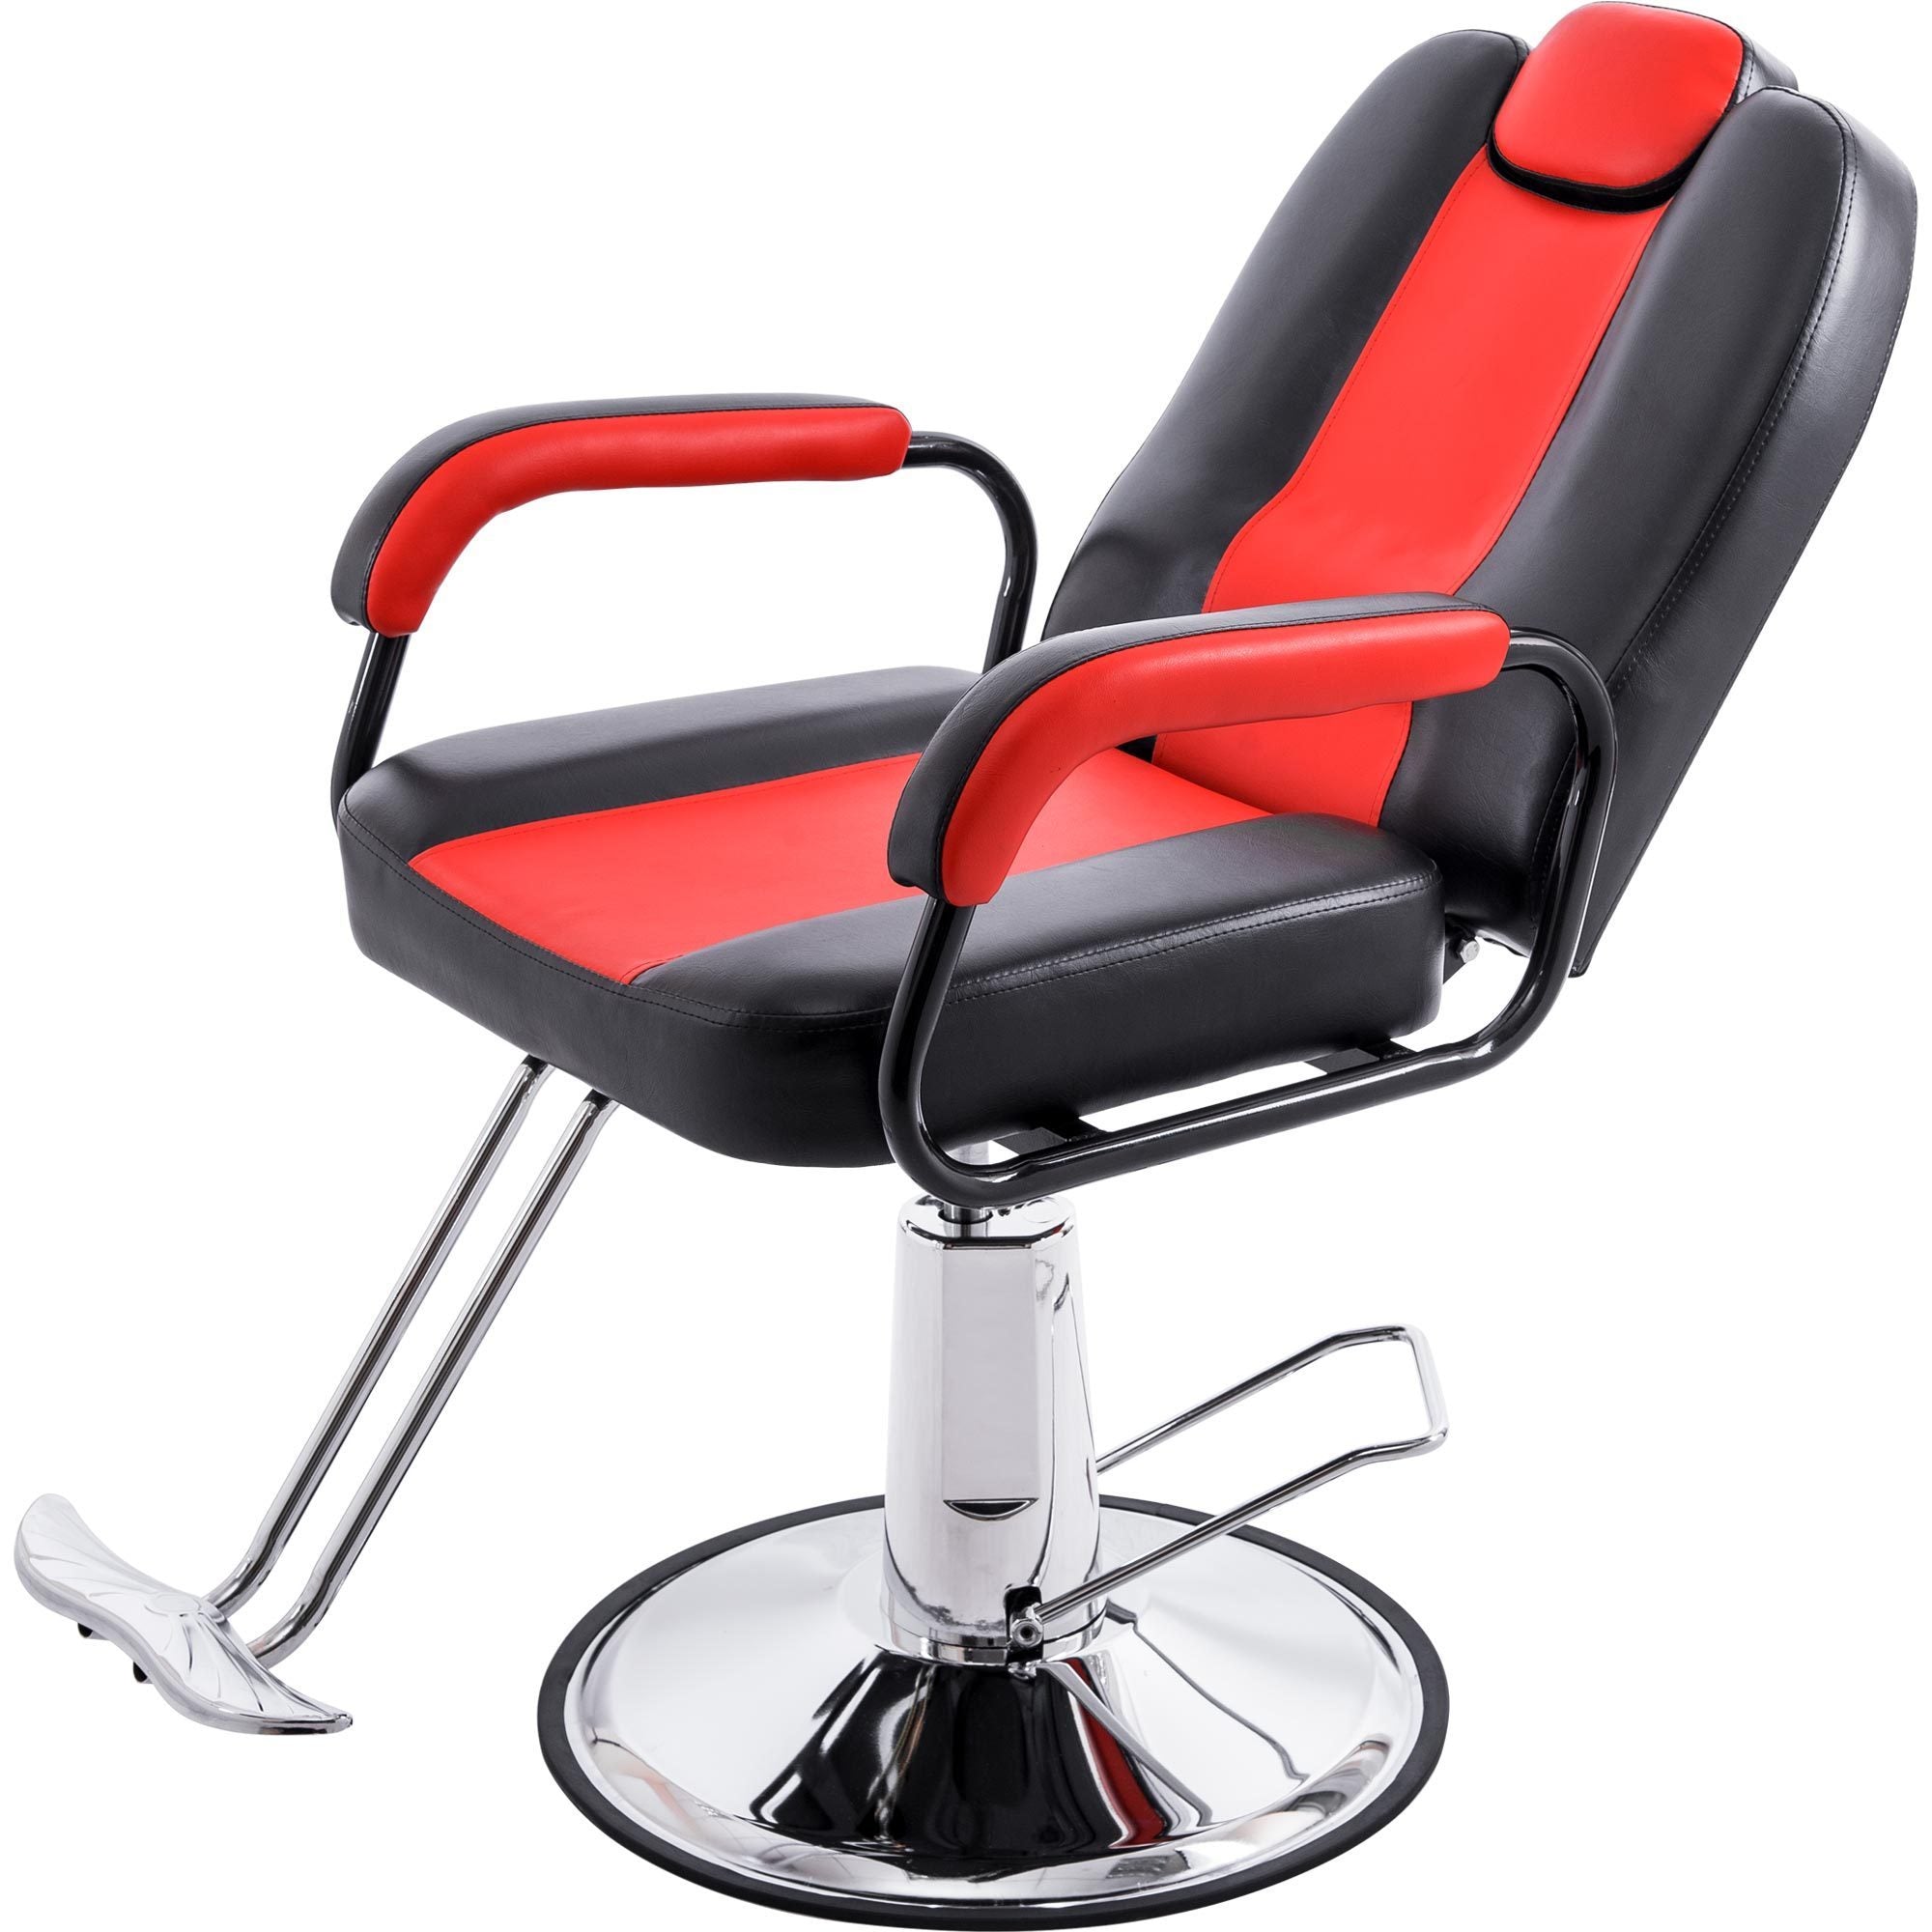 Deluxe Reclining Chair with Heavy Duty Pump for Beauty Salon, Barber and Tattoo Shop, Red